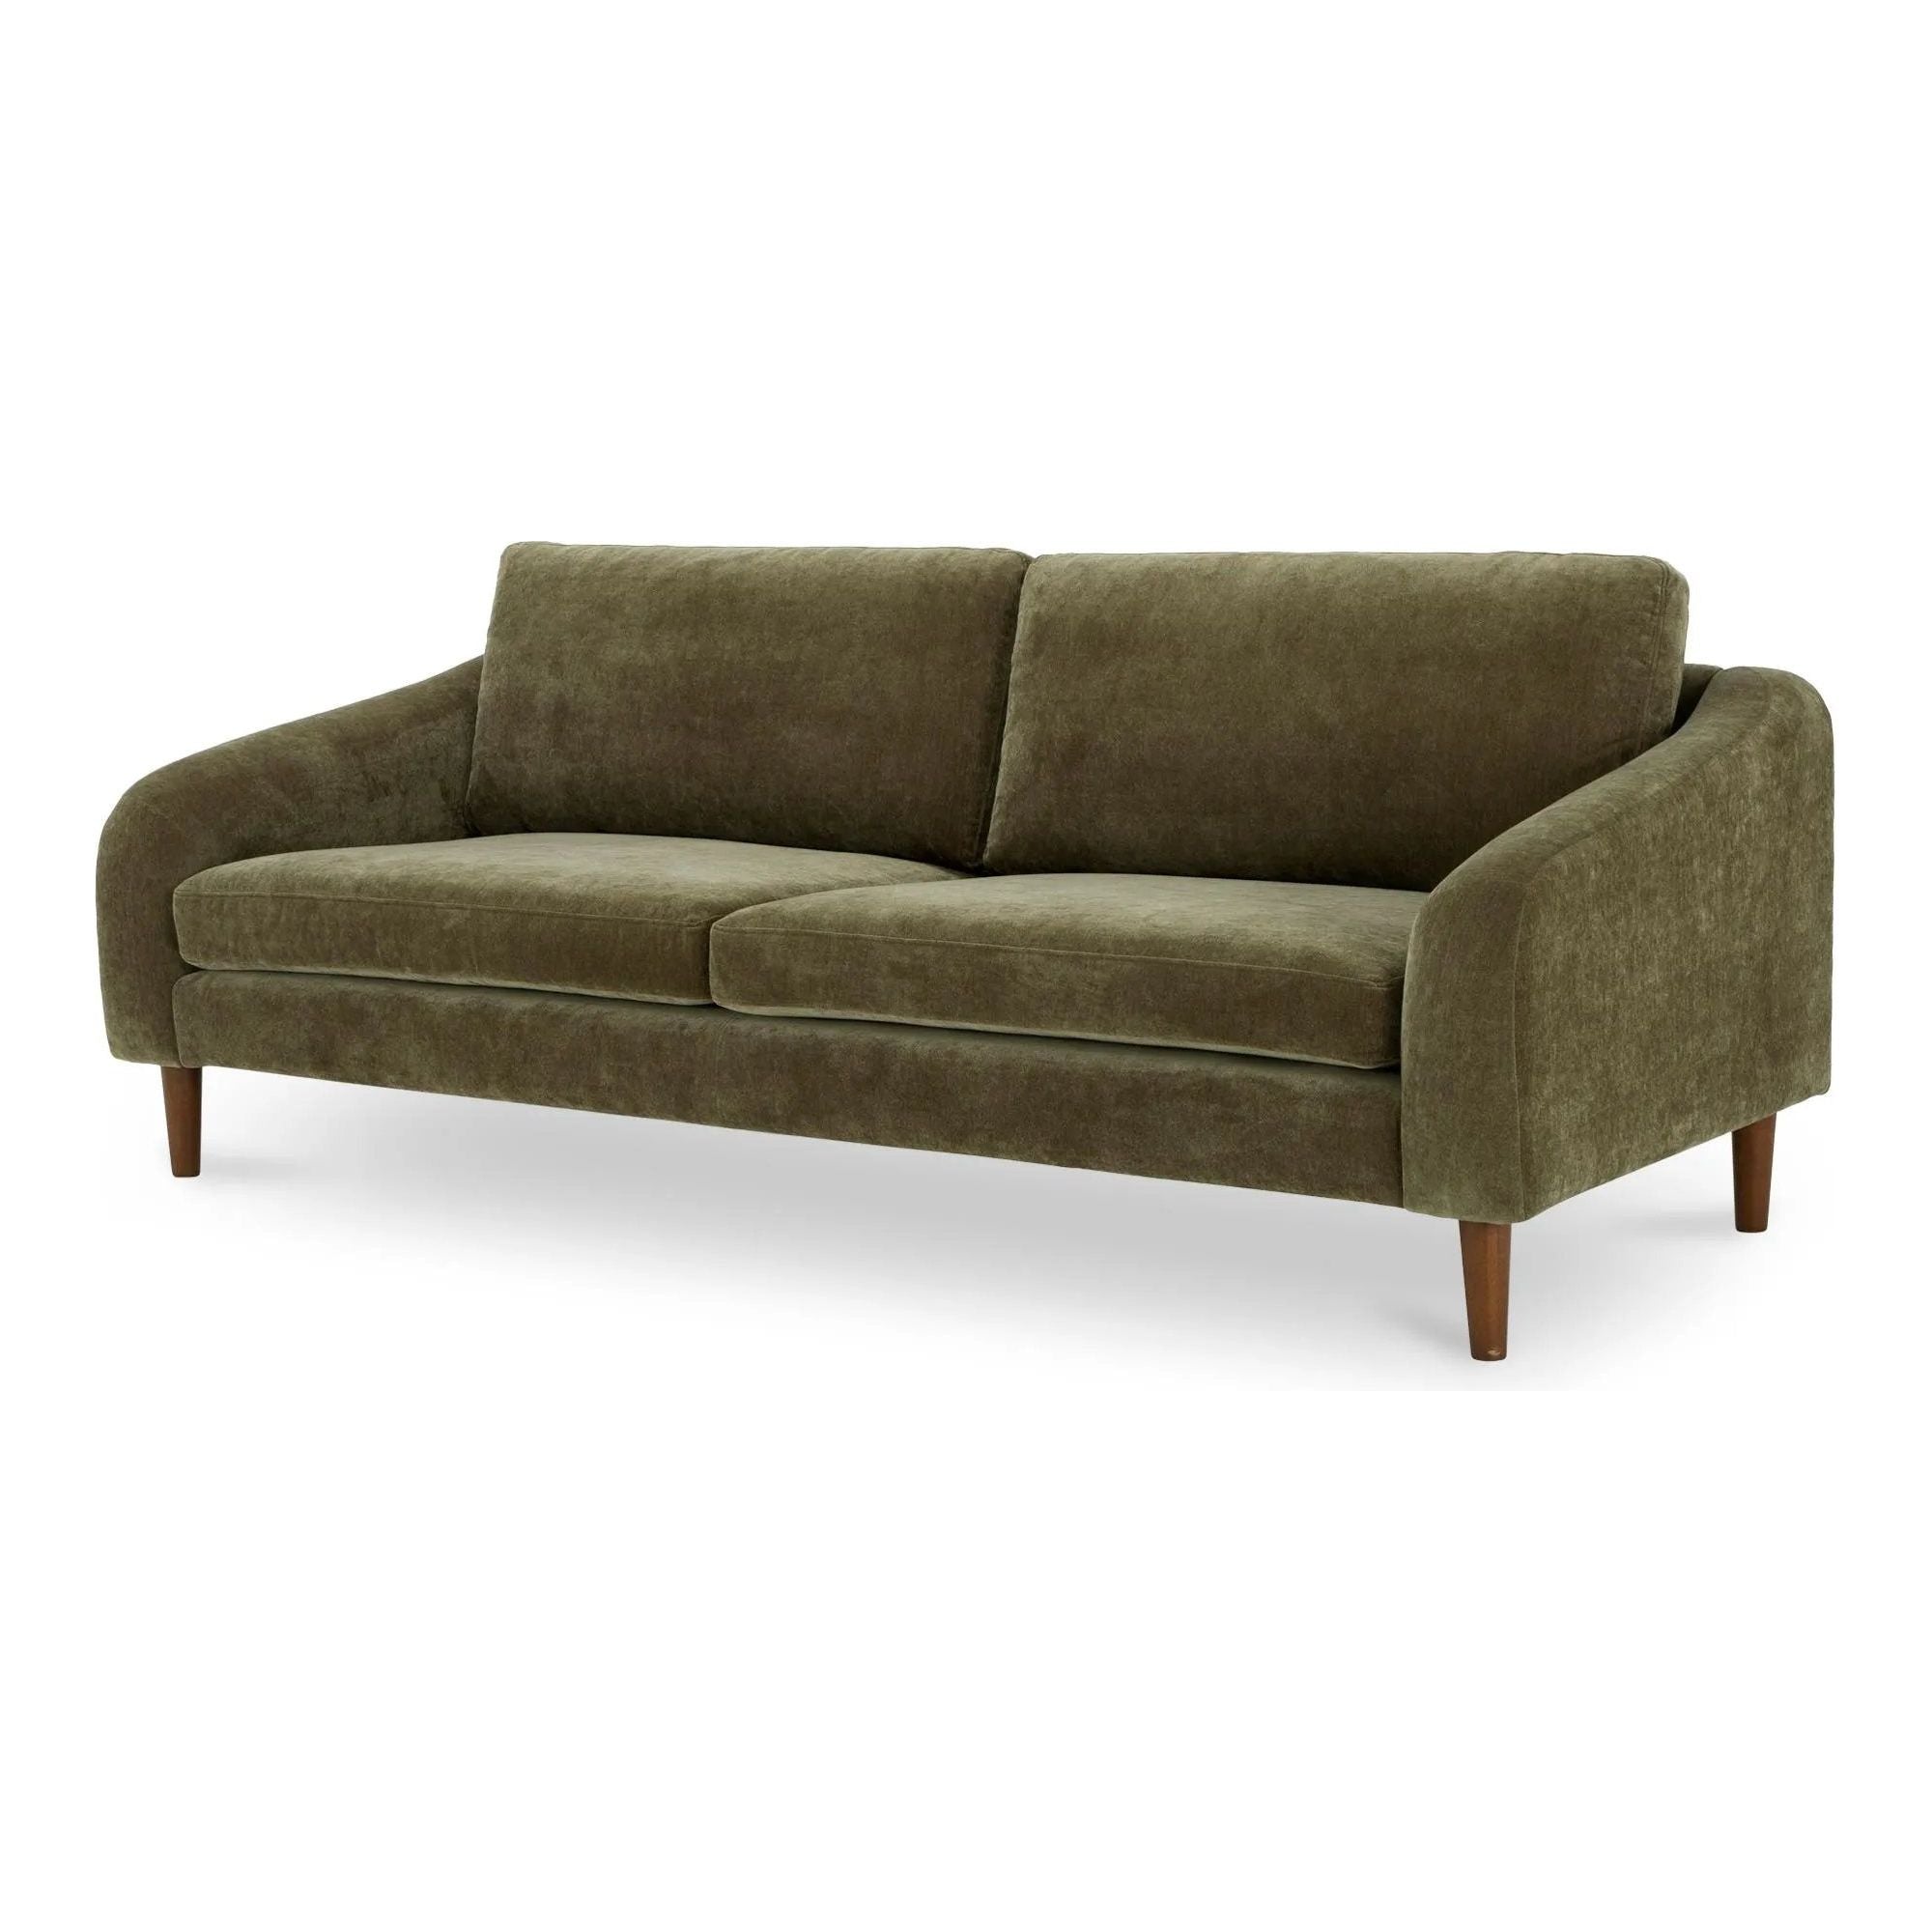 The Quinn sofa’s classic, transitional frame is designed for versatility, harmoniously fitting into a variety of spaces. It stands on a foundation of durability and sustainable charm with a wood frame and legs. Amethyst Home provides interior design, new home construction design consulting, vintage area rugs, and lighting in the Winter Garden metro area.